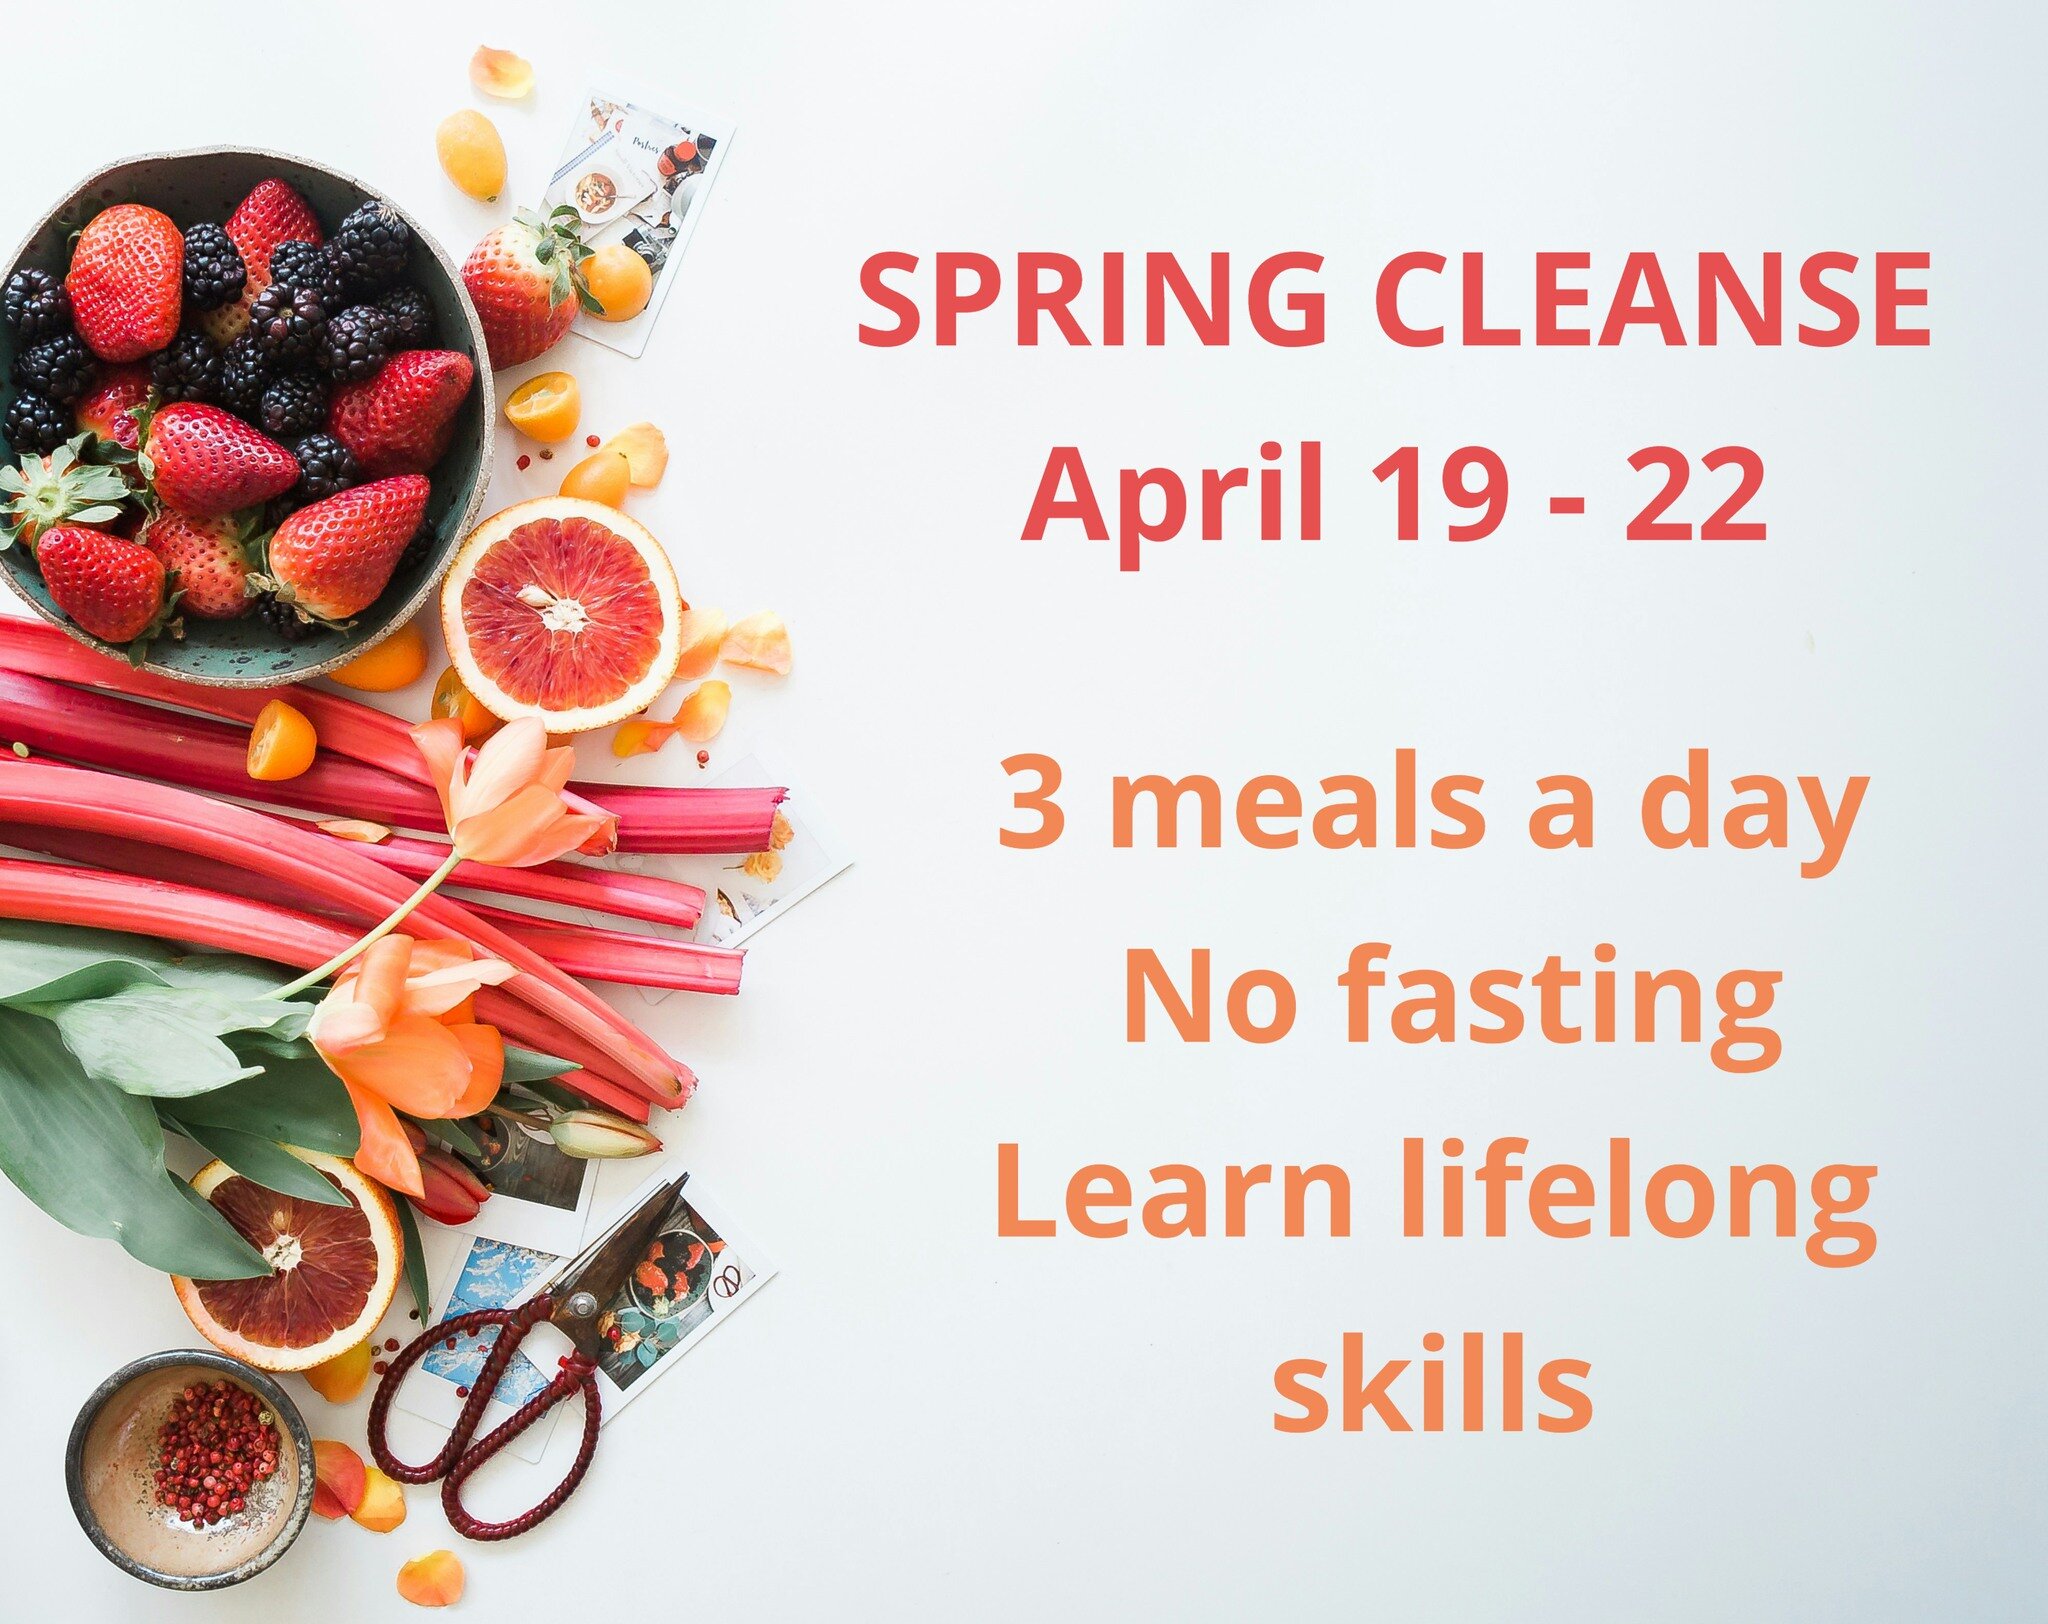 Feeling groggy? Allergies bothering you? Feel overall heavy? This is your chance to accelerate the detox process your body already naturally wants to do this time of the year? Join me for a 3 day cleanse where we will do just that. Link in bio for mo